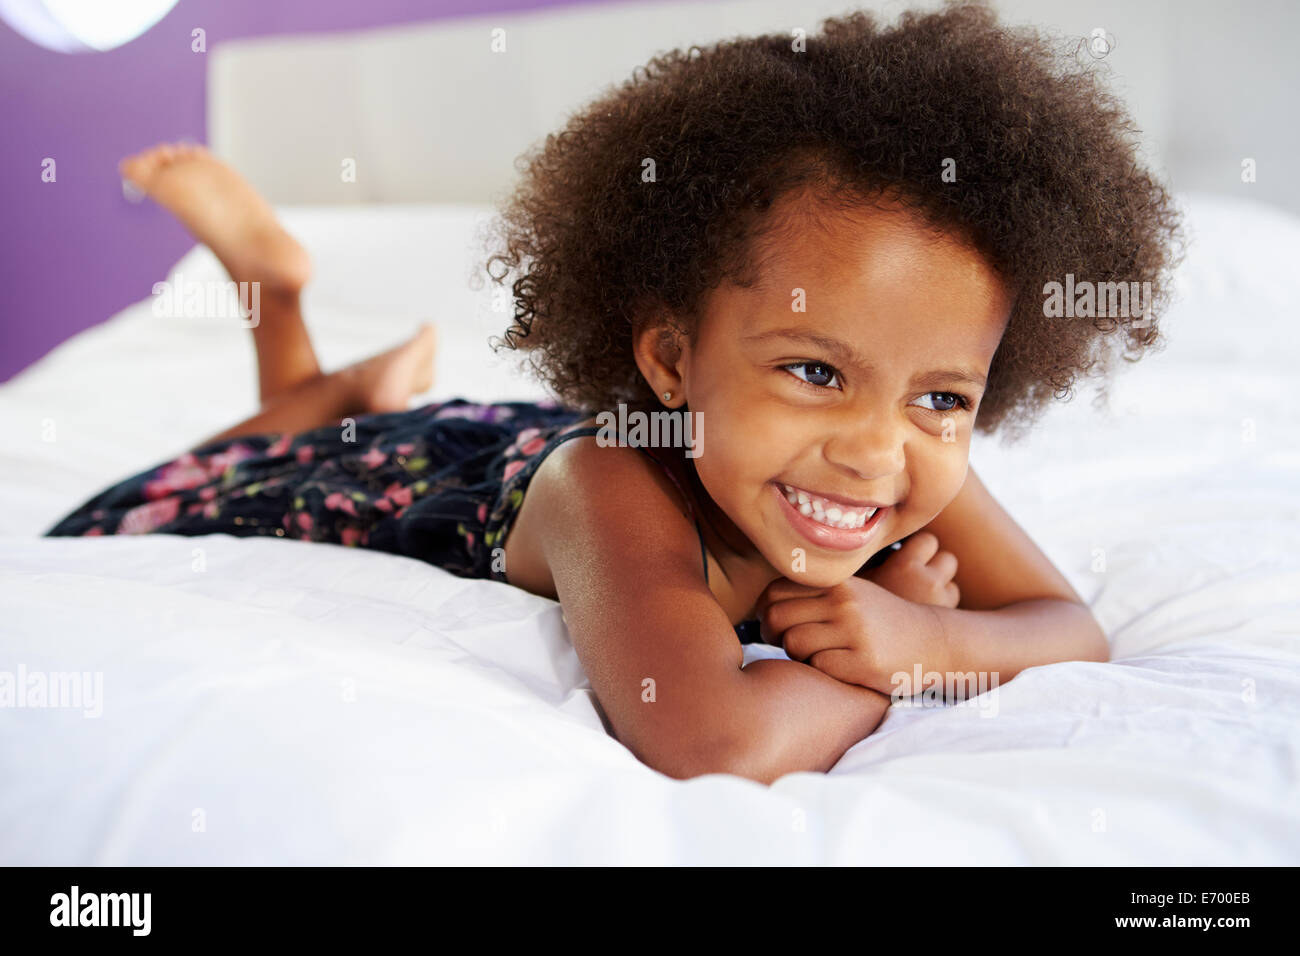 Cute Little Girl Lying On Tummy In Parent's Bed Stock Photo